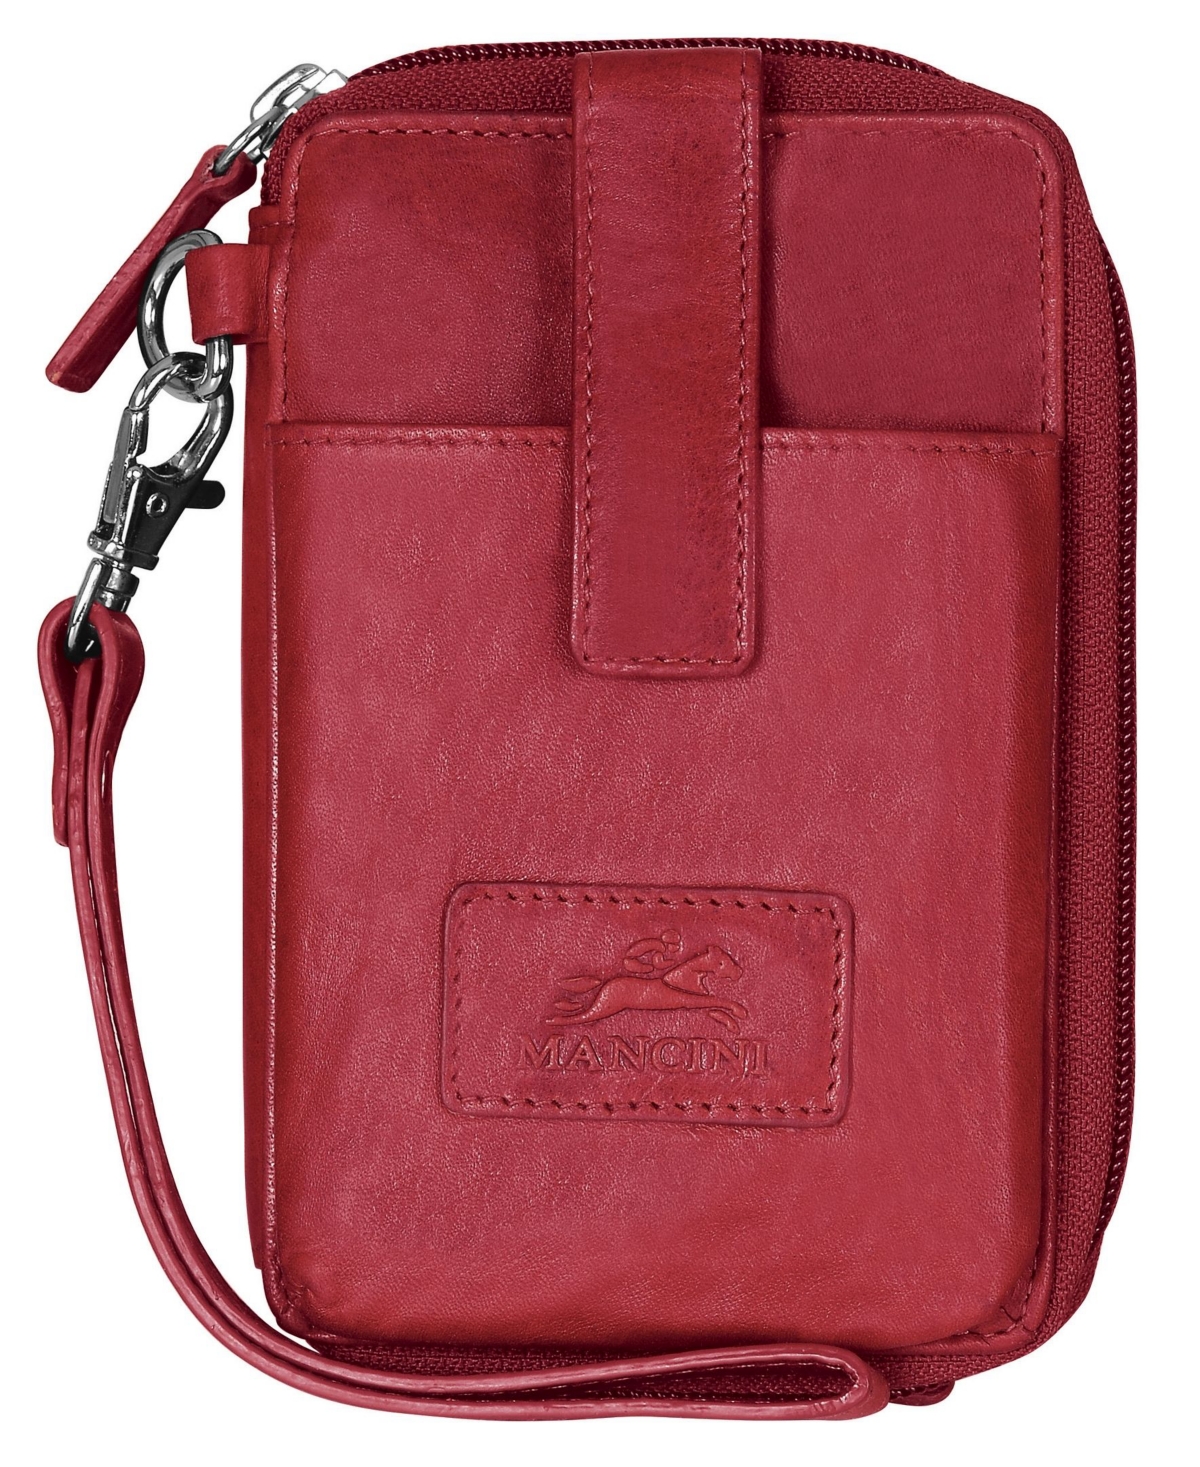 Casablanca Collection Rfid Secure Cell Phone Wallet - Red